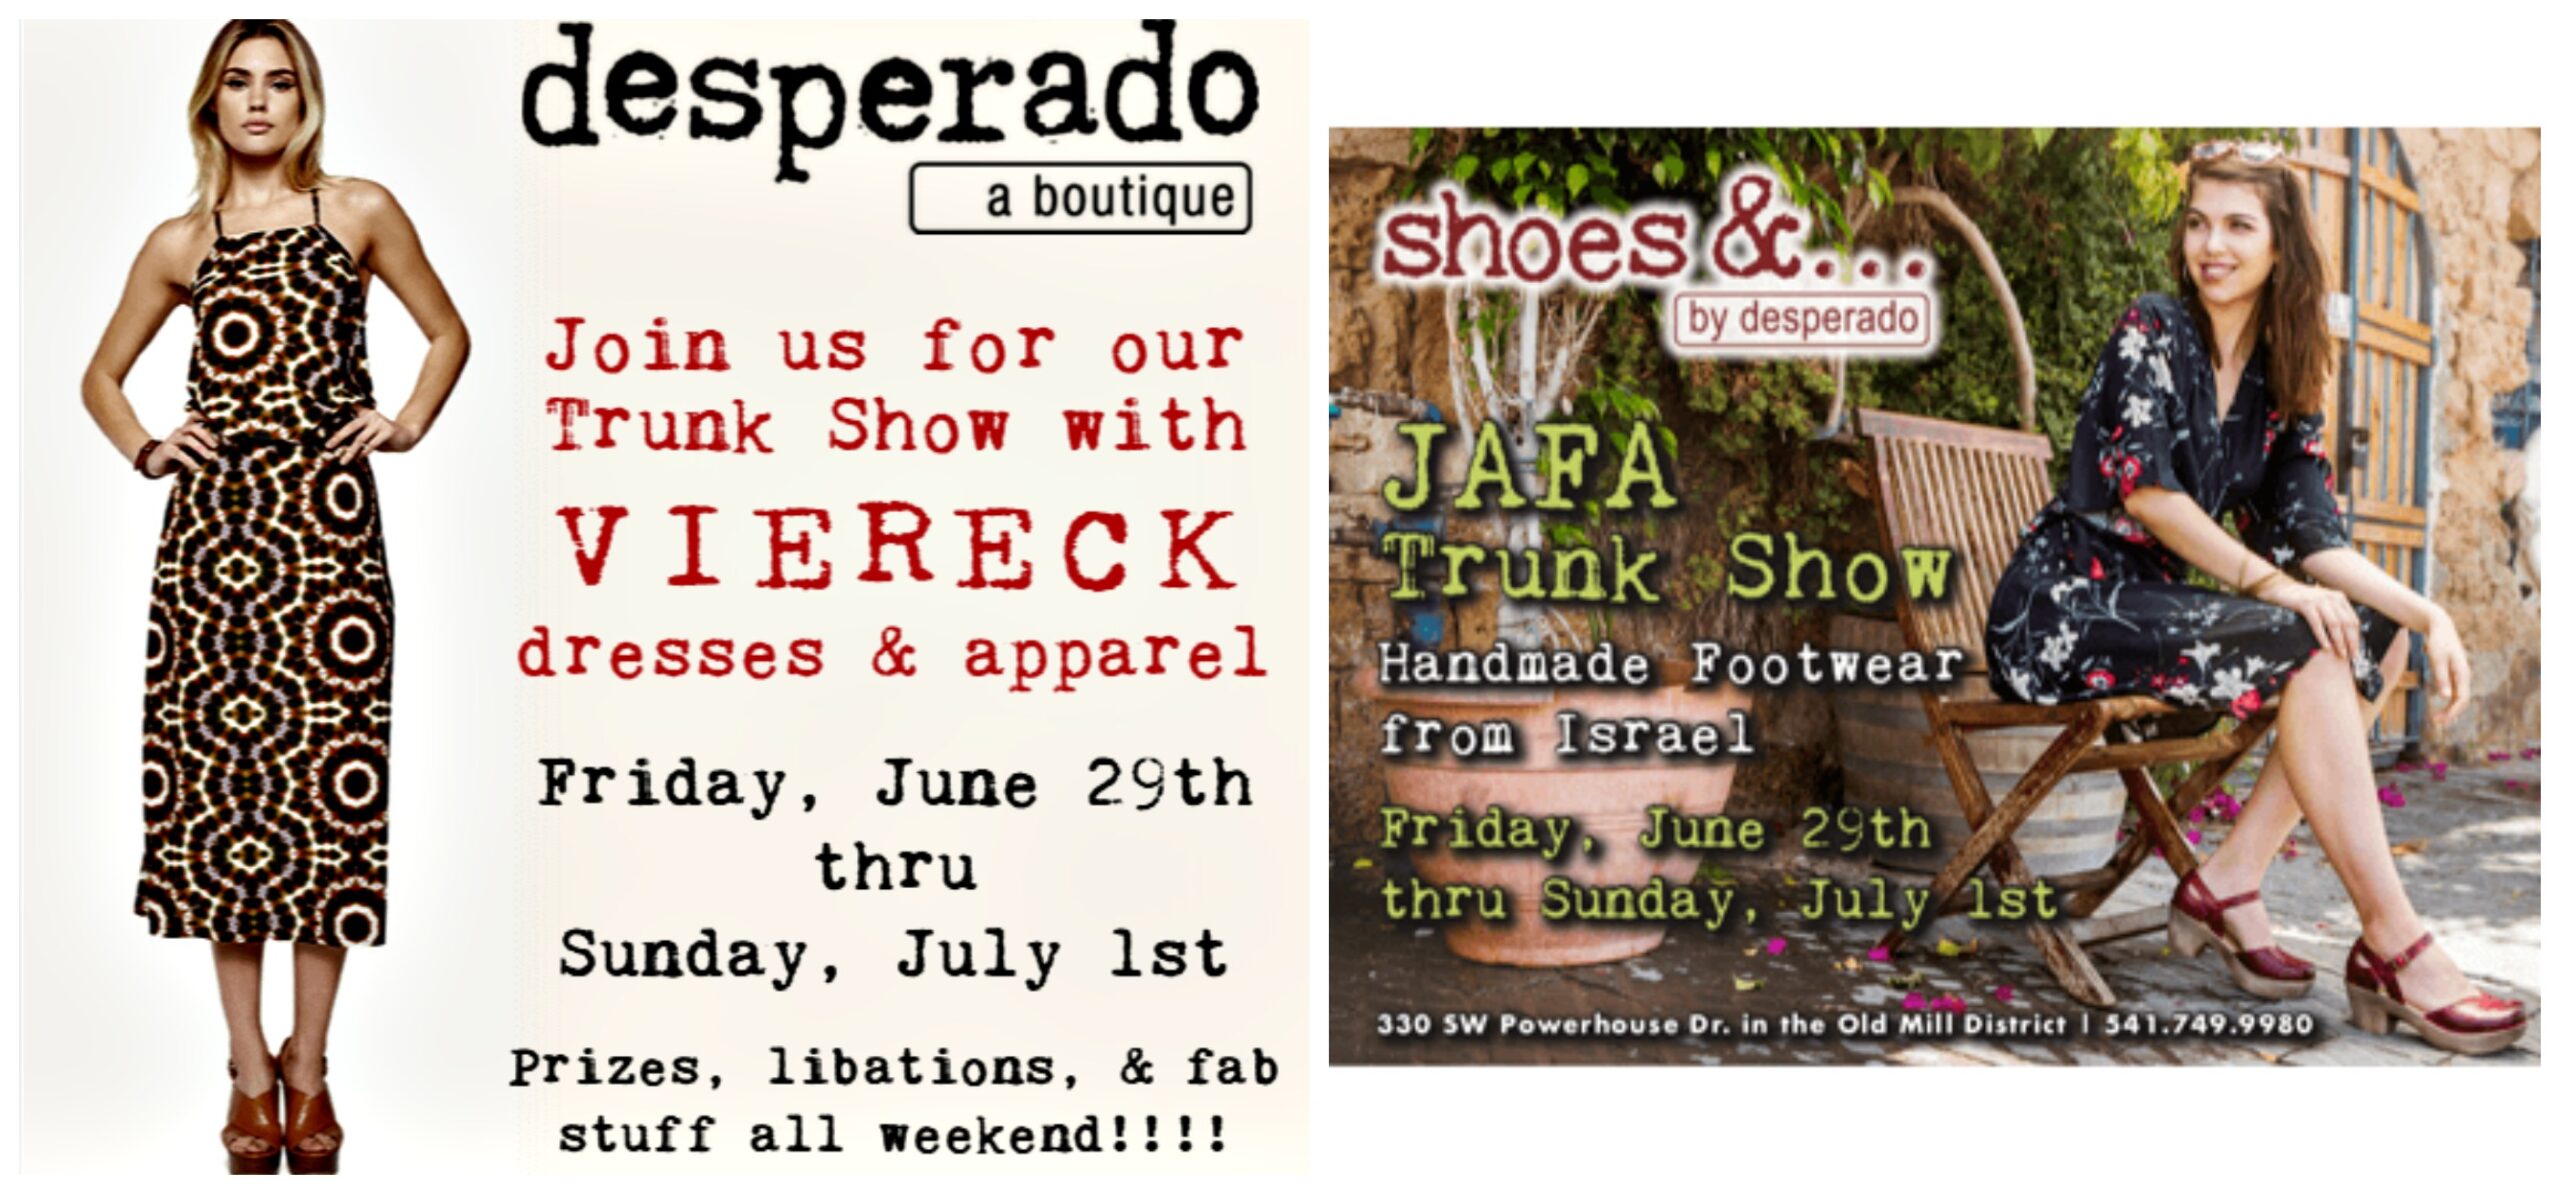 Image of our ad for Viereck & Jafa Trunk Show.